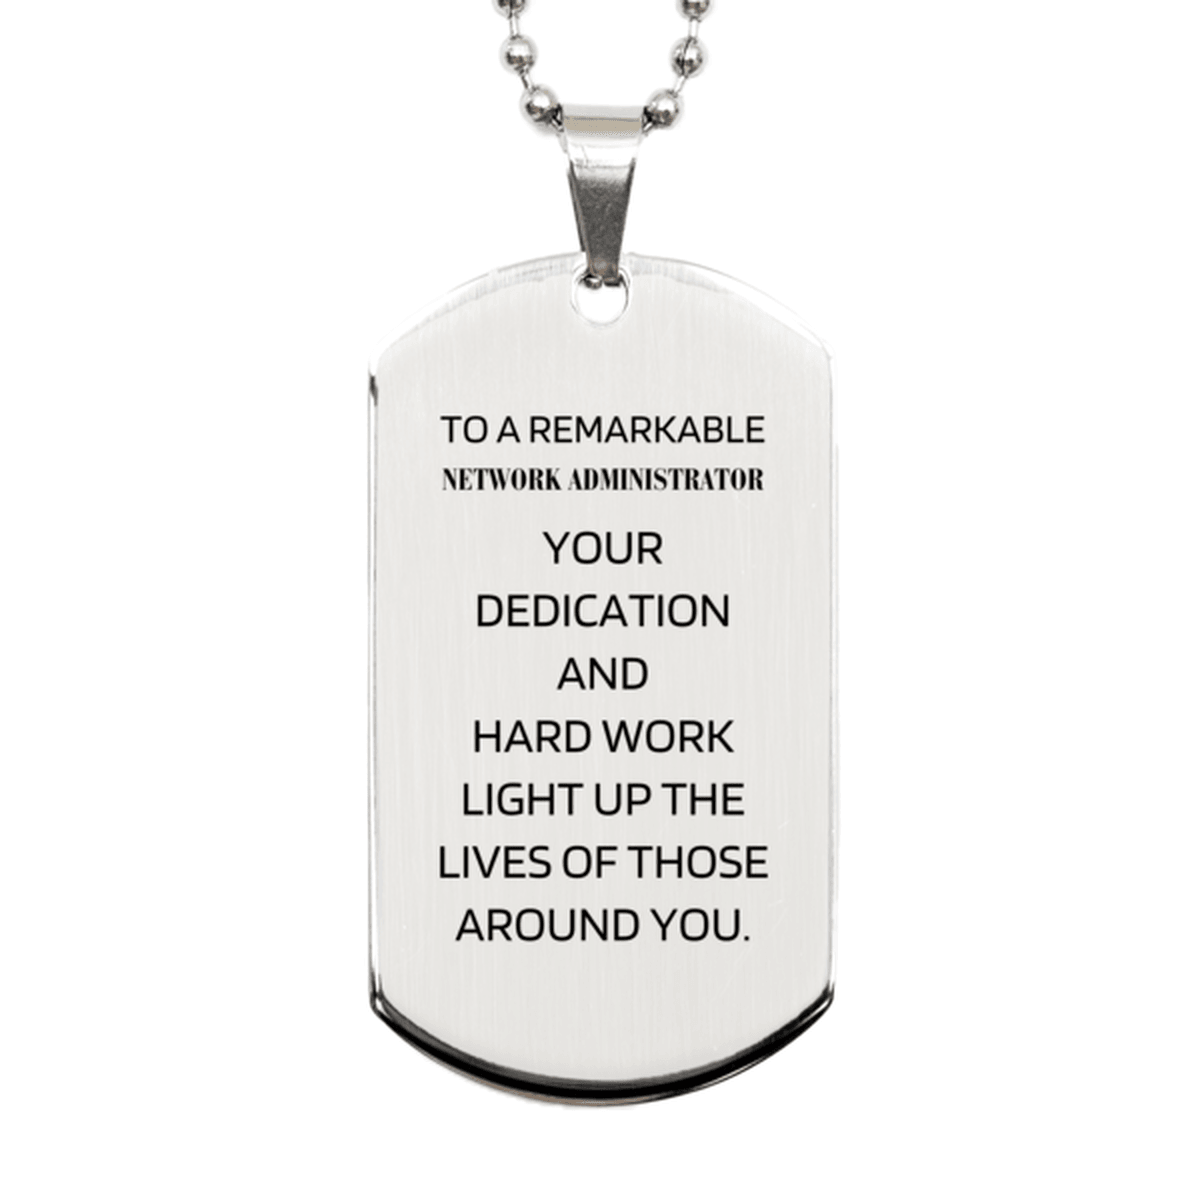 Remarkable Network Administrator Gifts, Your dedication and hard work, Inspirational Birthday Christmas Unique Silver Dog Tag For Network Administrator, Coworkers, Men, Women, Friends - Mallard Moon Gift Shop